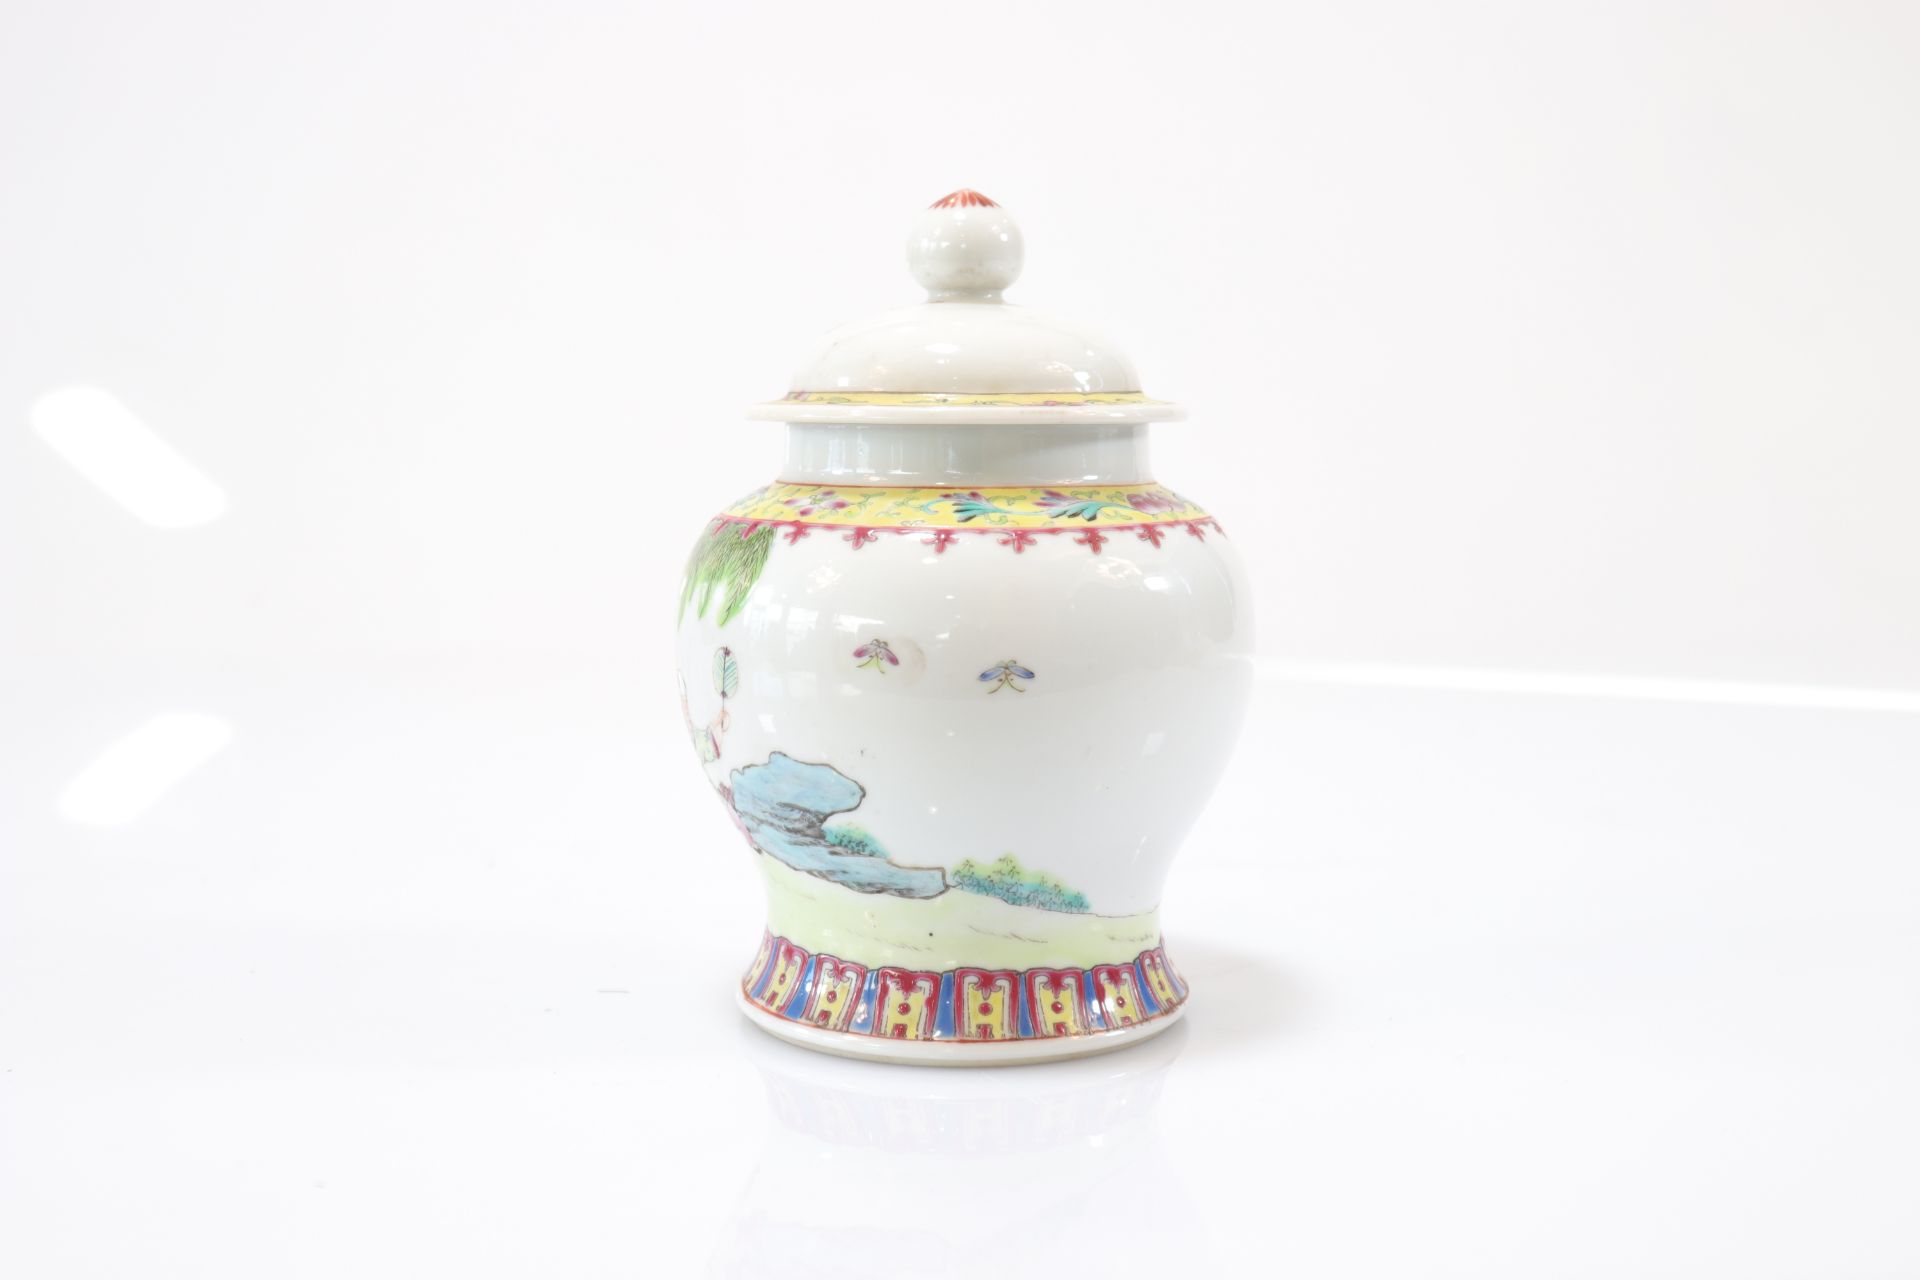 Covered potiche in porcelain from the Republic period